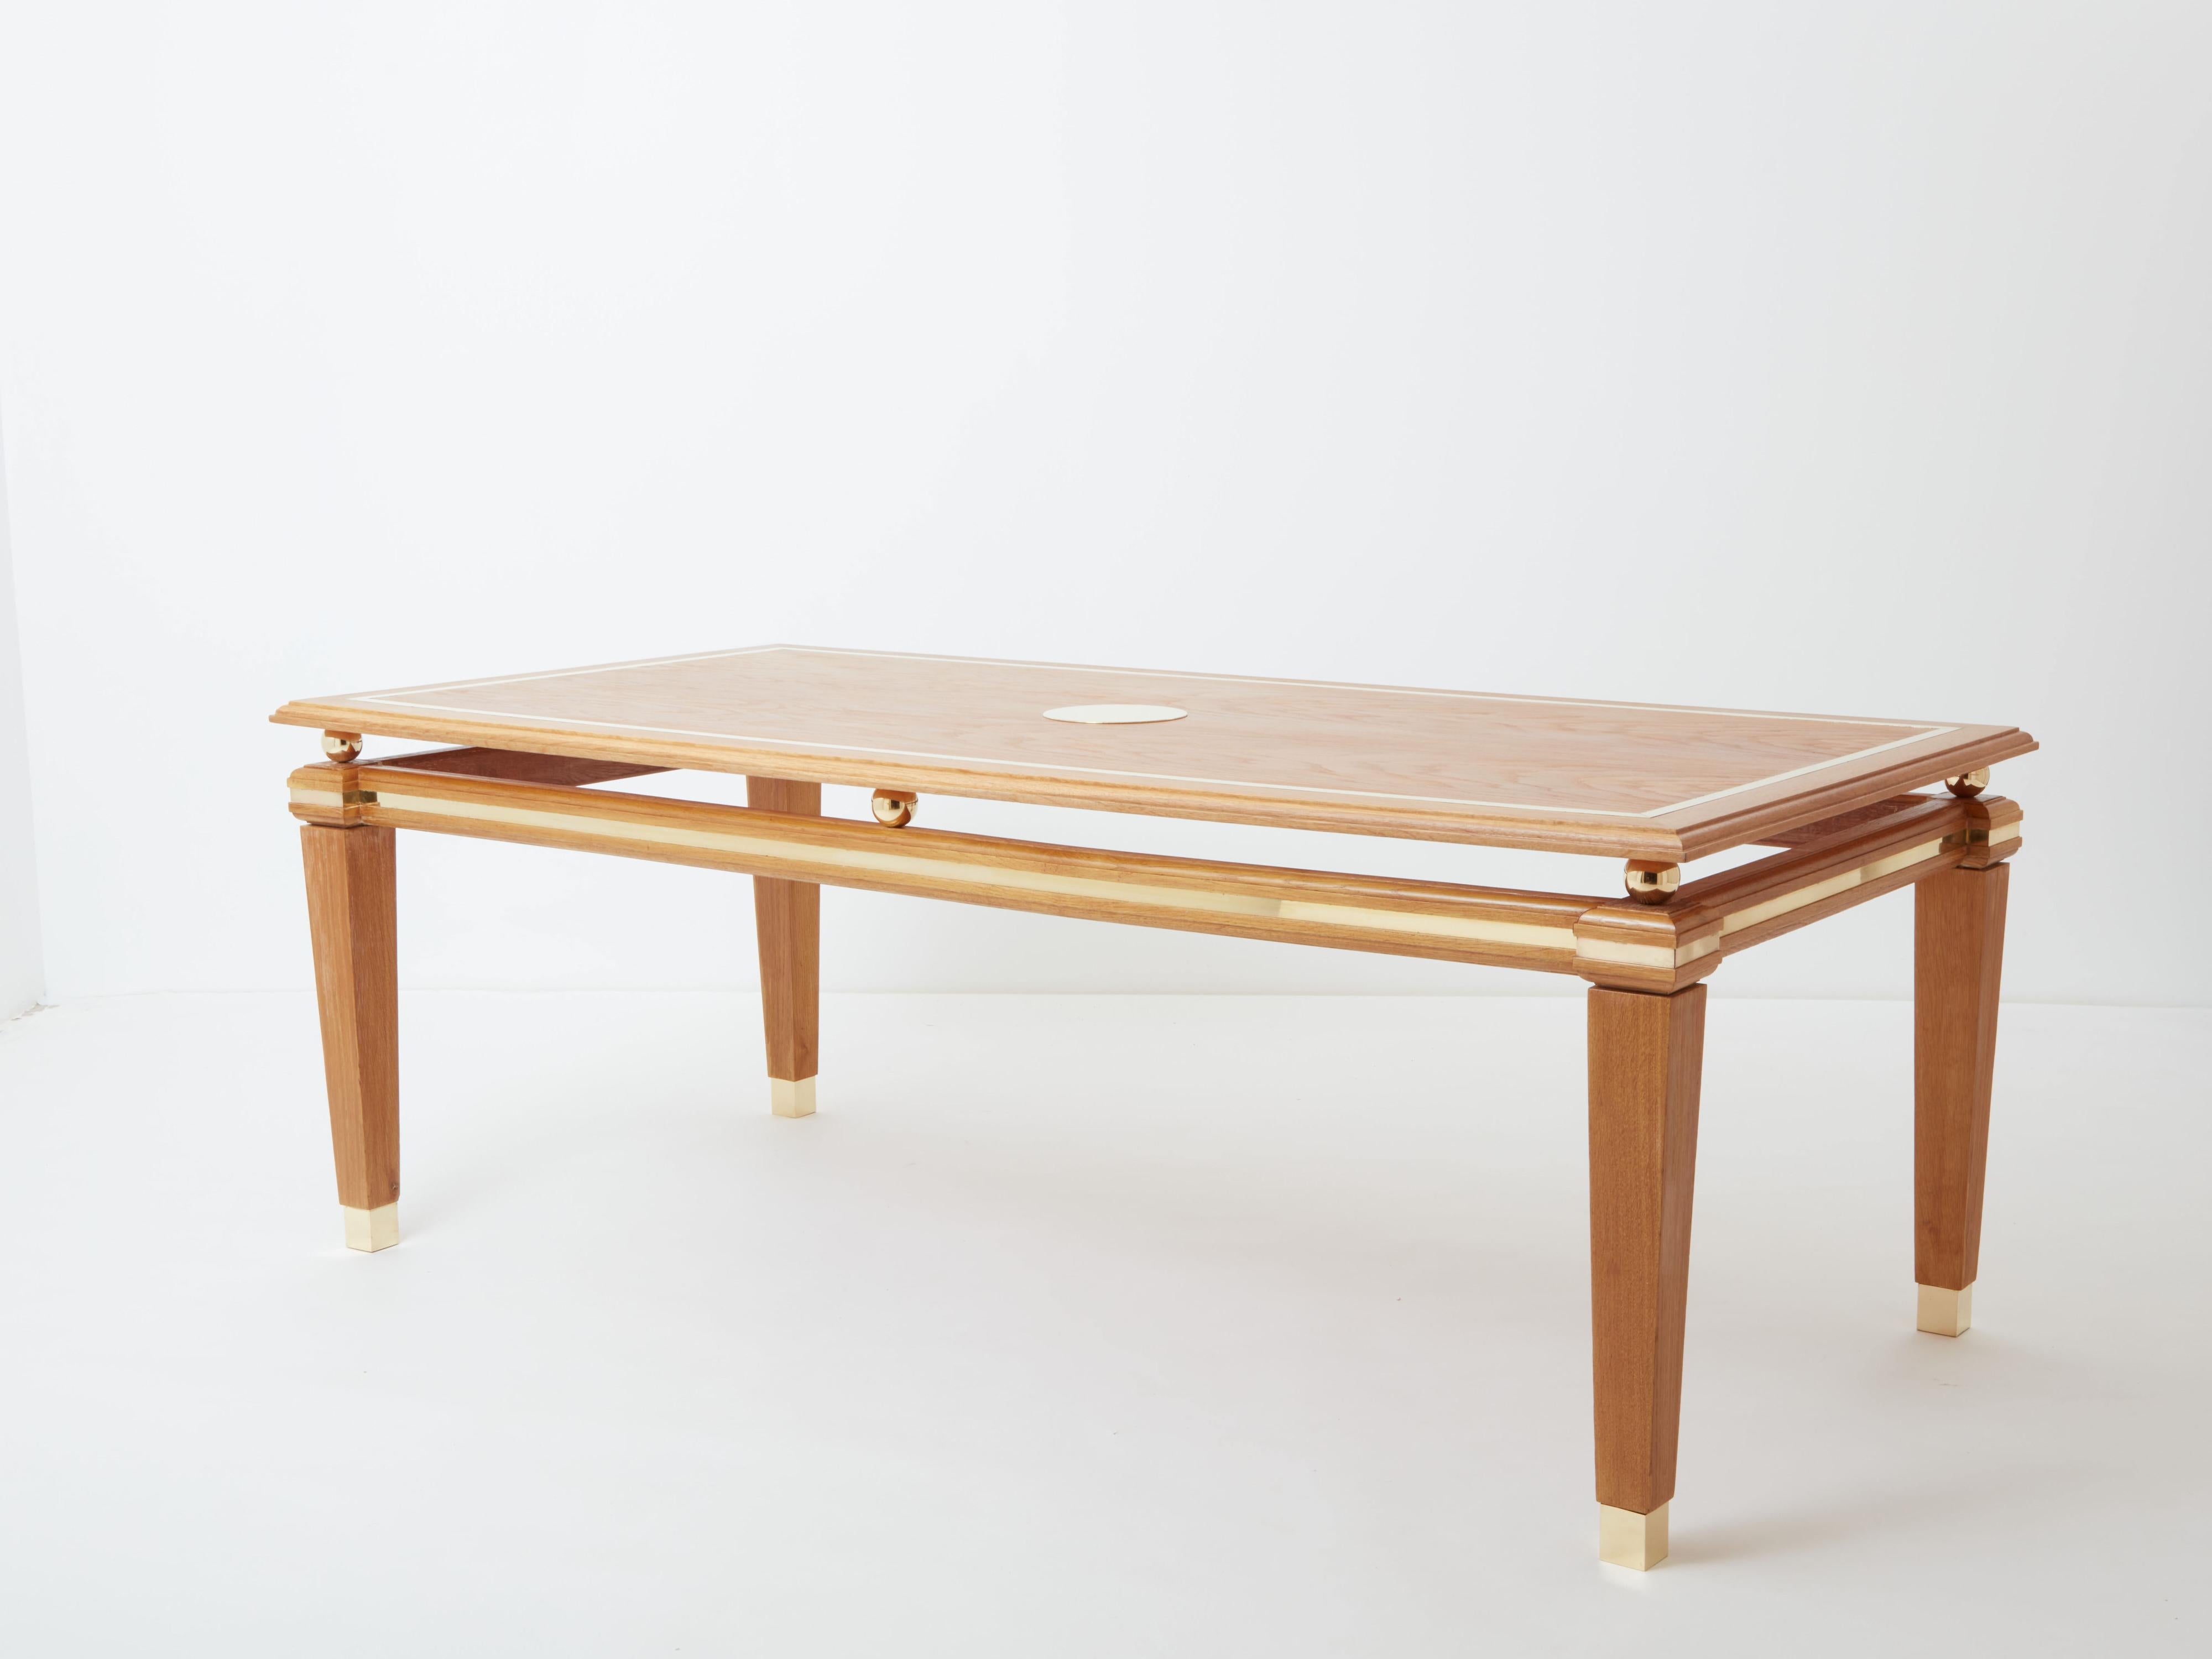 This beautiful cerused oak dining table was designed by Italian mid-century modern designer Tommaso Barbi in the 1970s. The top features a nice brass inlay frame, with a round raised brass piece to serve as a centerpiece. Six solid brass balls